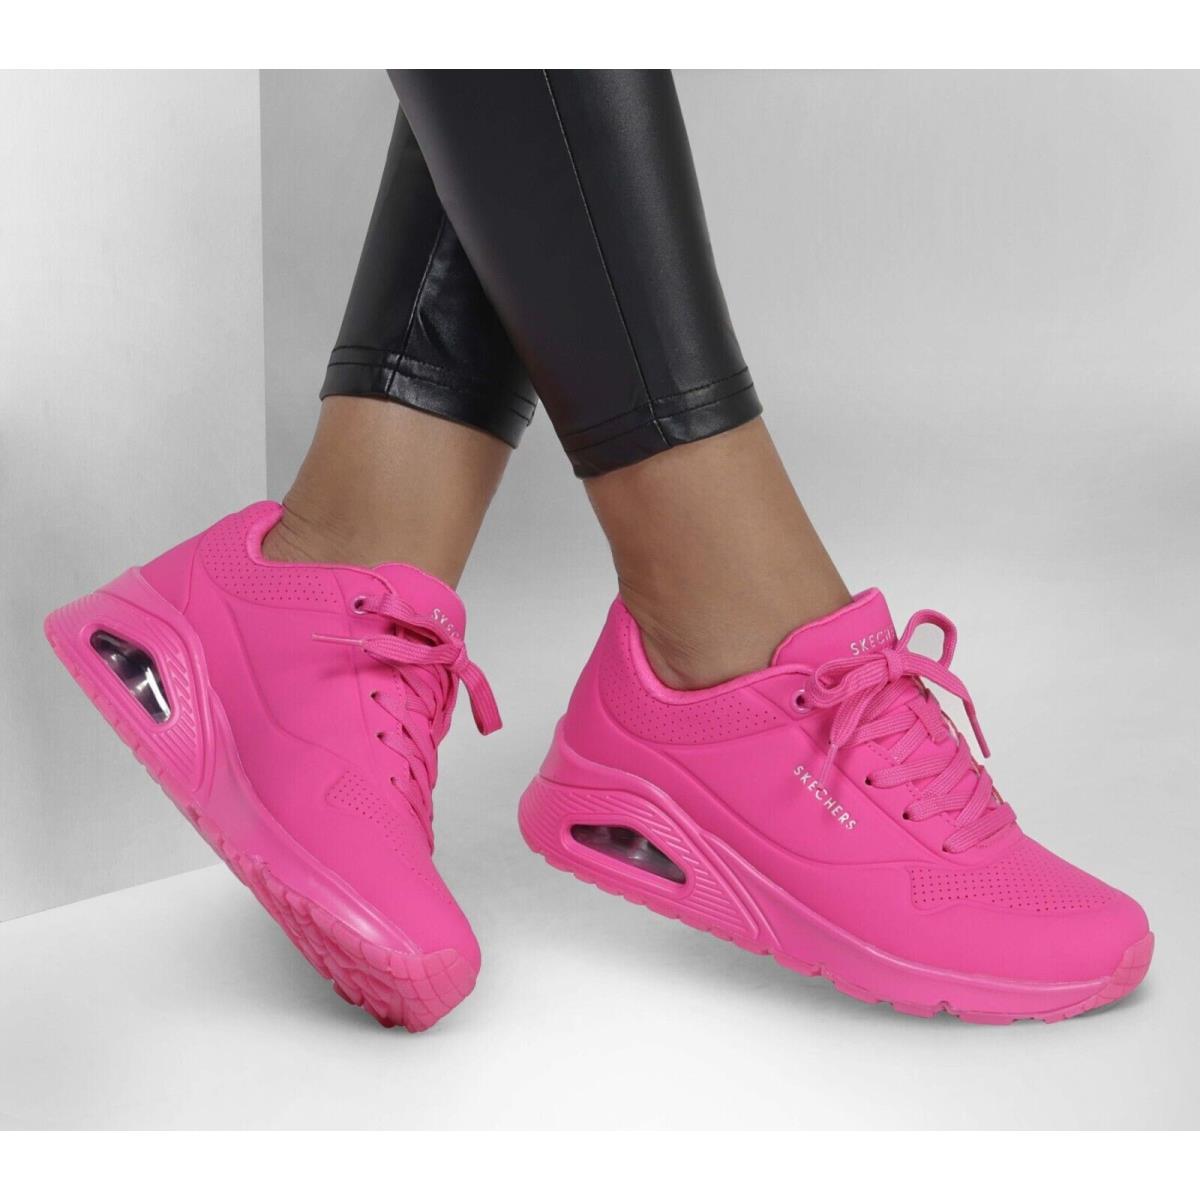 Skechers shoes Uno Night Shades - Hot Pink 6